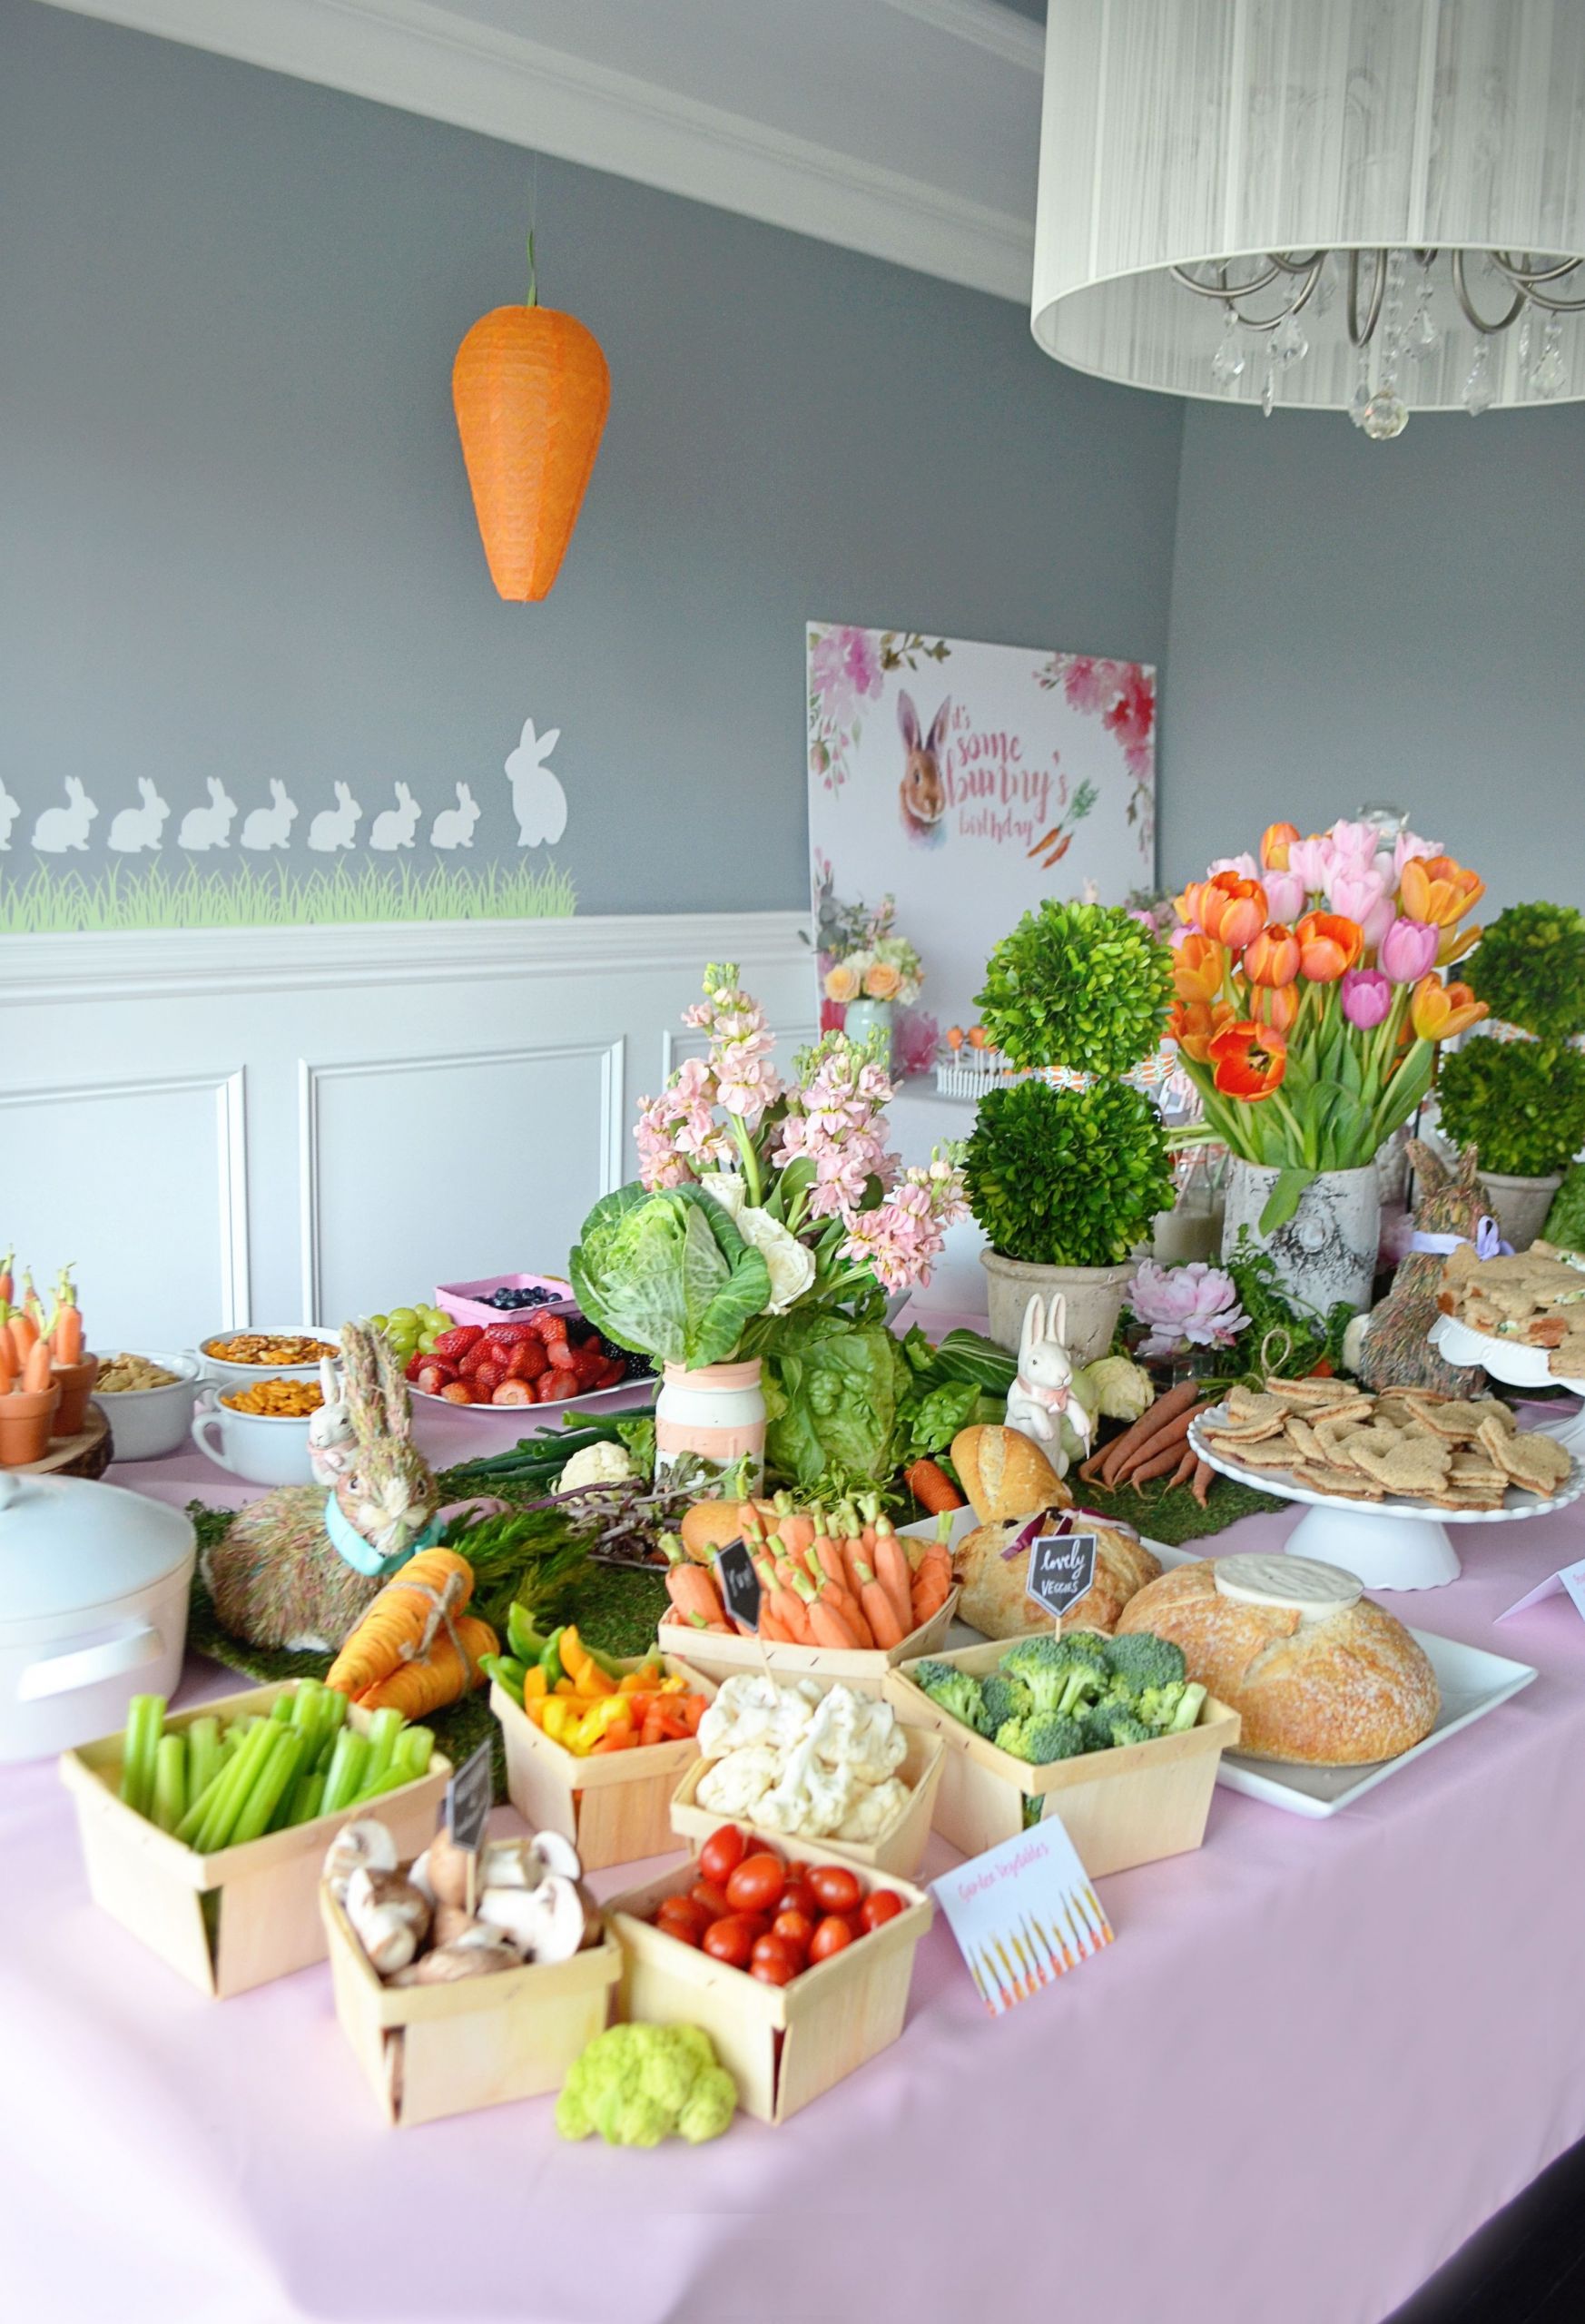 Easter Bunny Party Ideas
 Shop the Party Bunny Themed Party